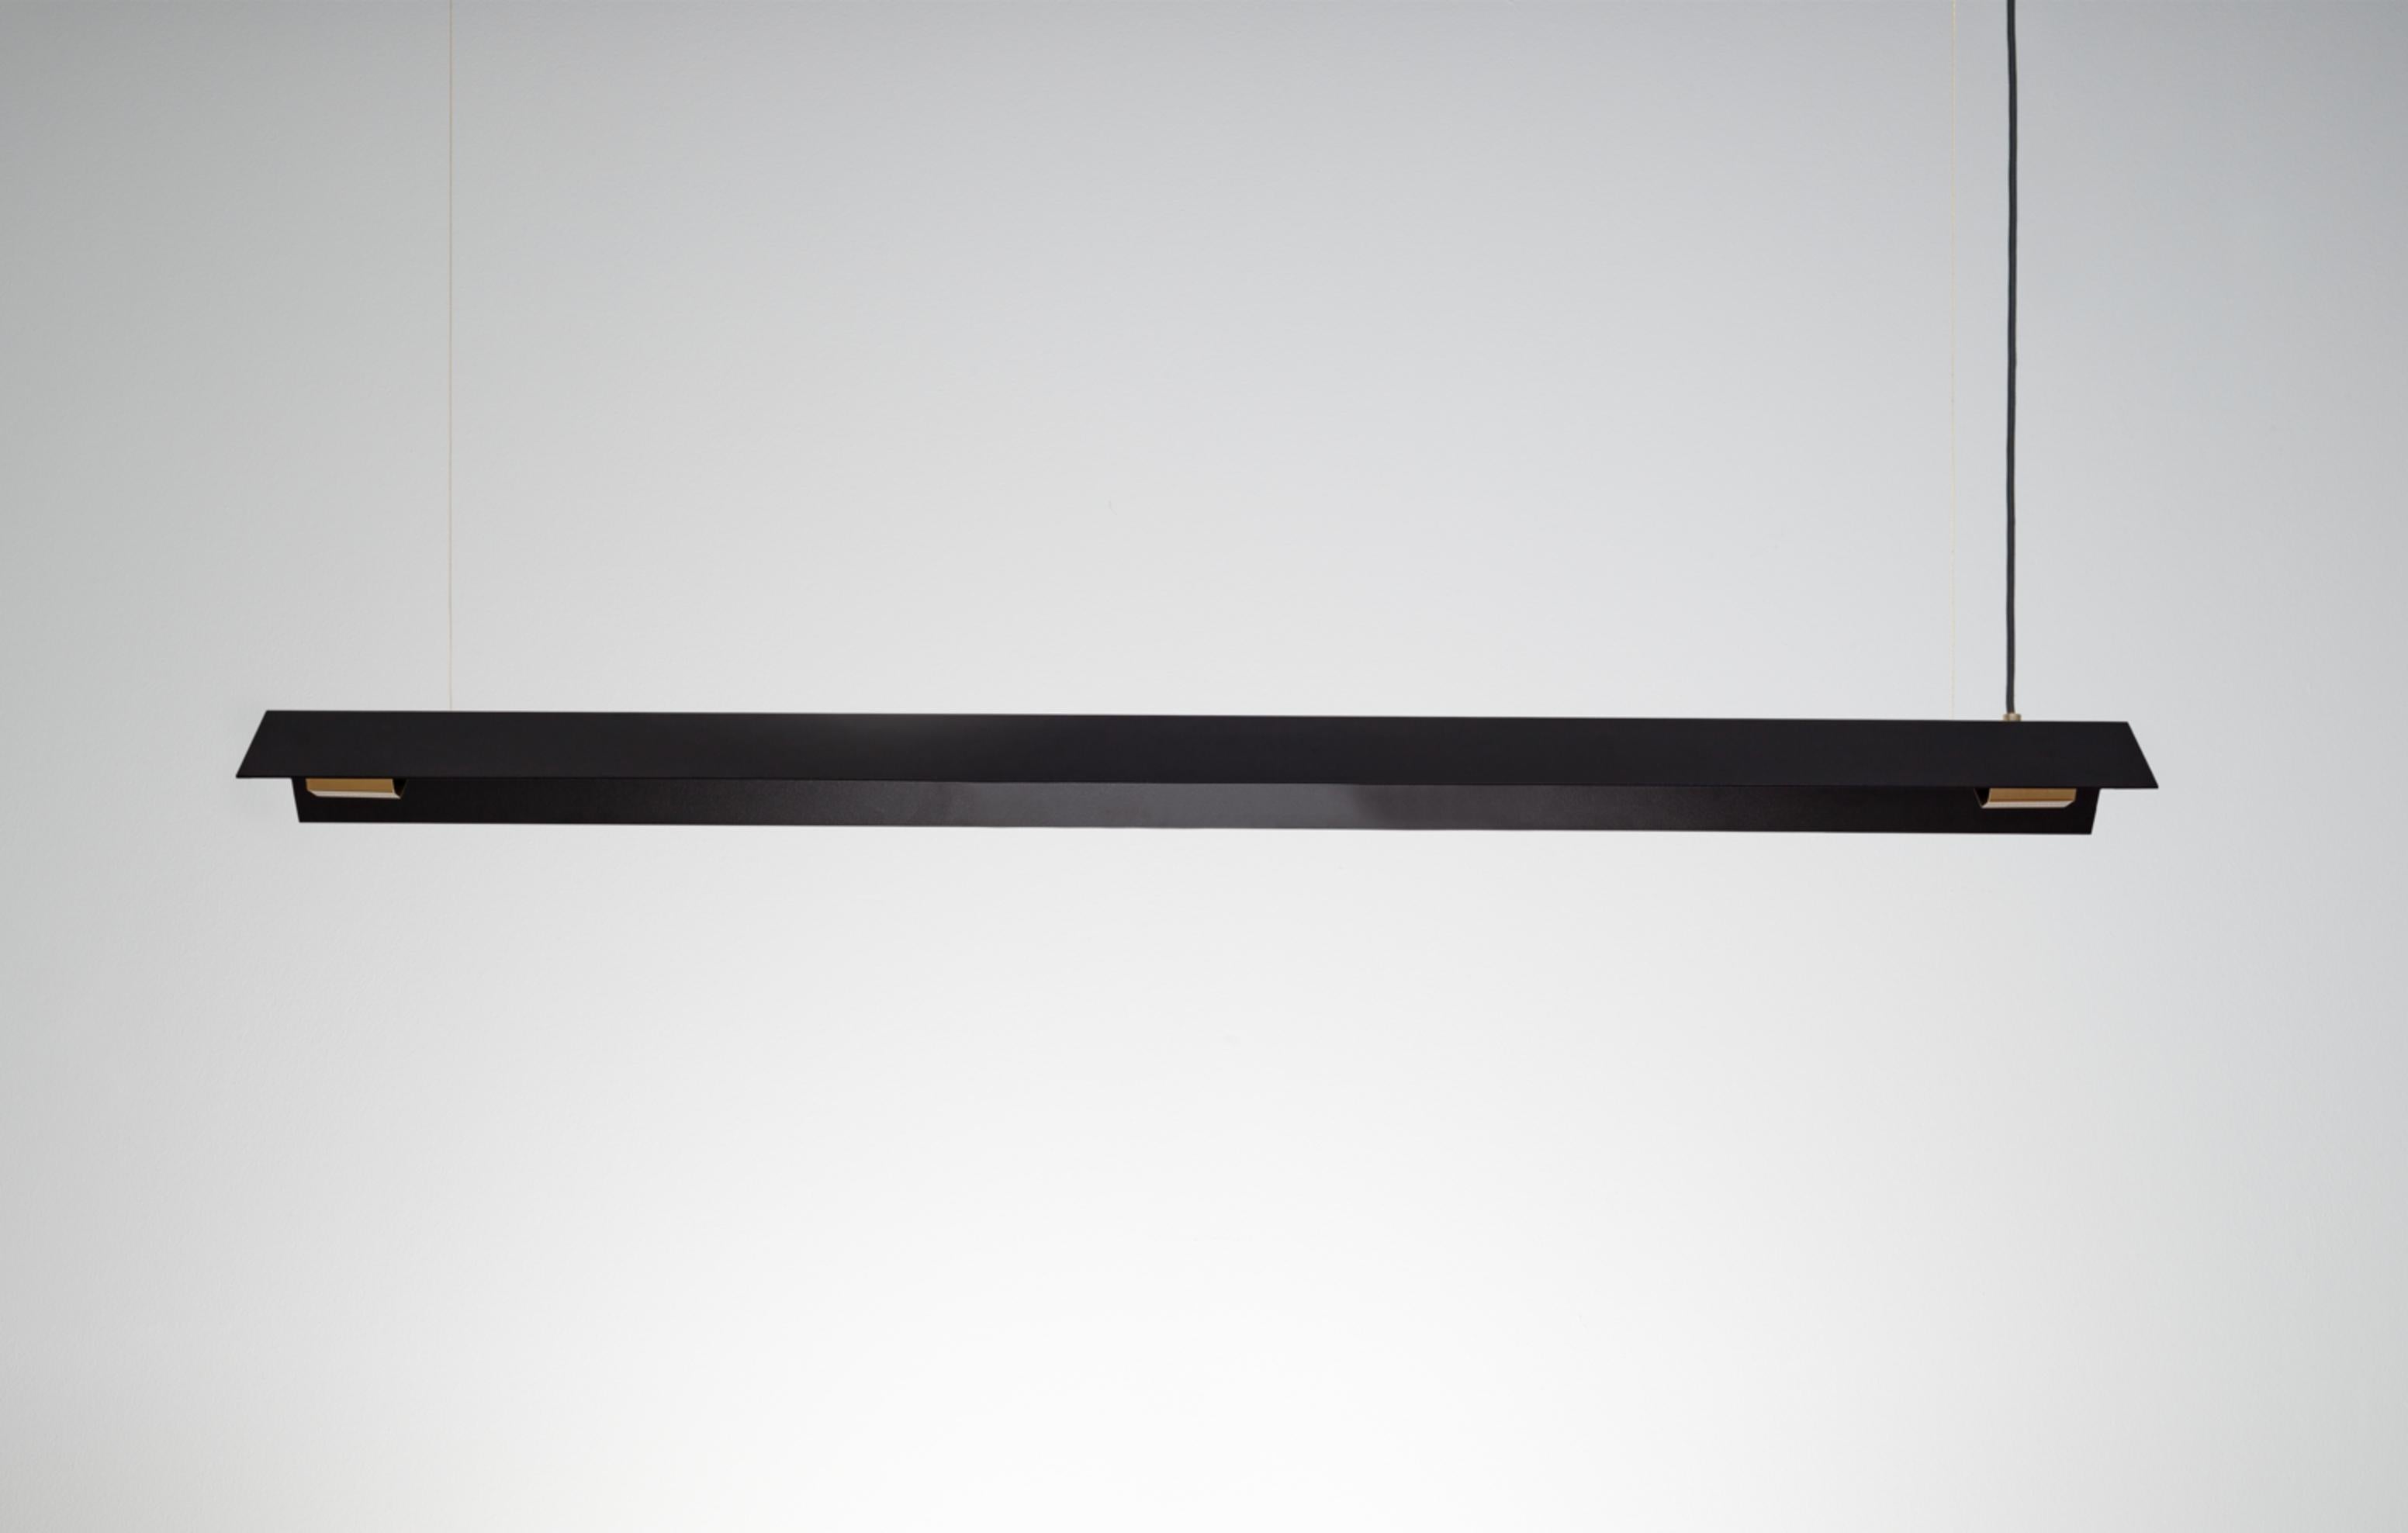 Small Misalliance Ex Jet Black Suspended Light by Lexavala
Dimensions: D 16 x W 70 x H 8 cm
Materials: powder coated shade with details made of brass or stainless steel.

There are two lenghts of socket covers, extending over the LED. Two short